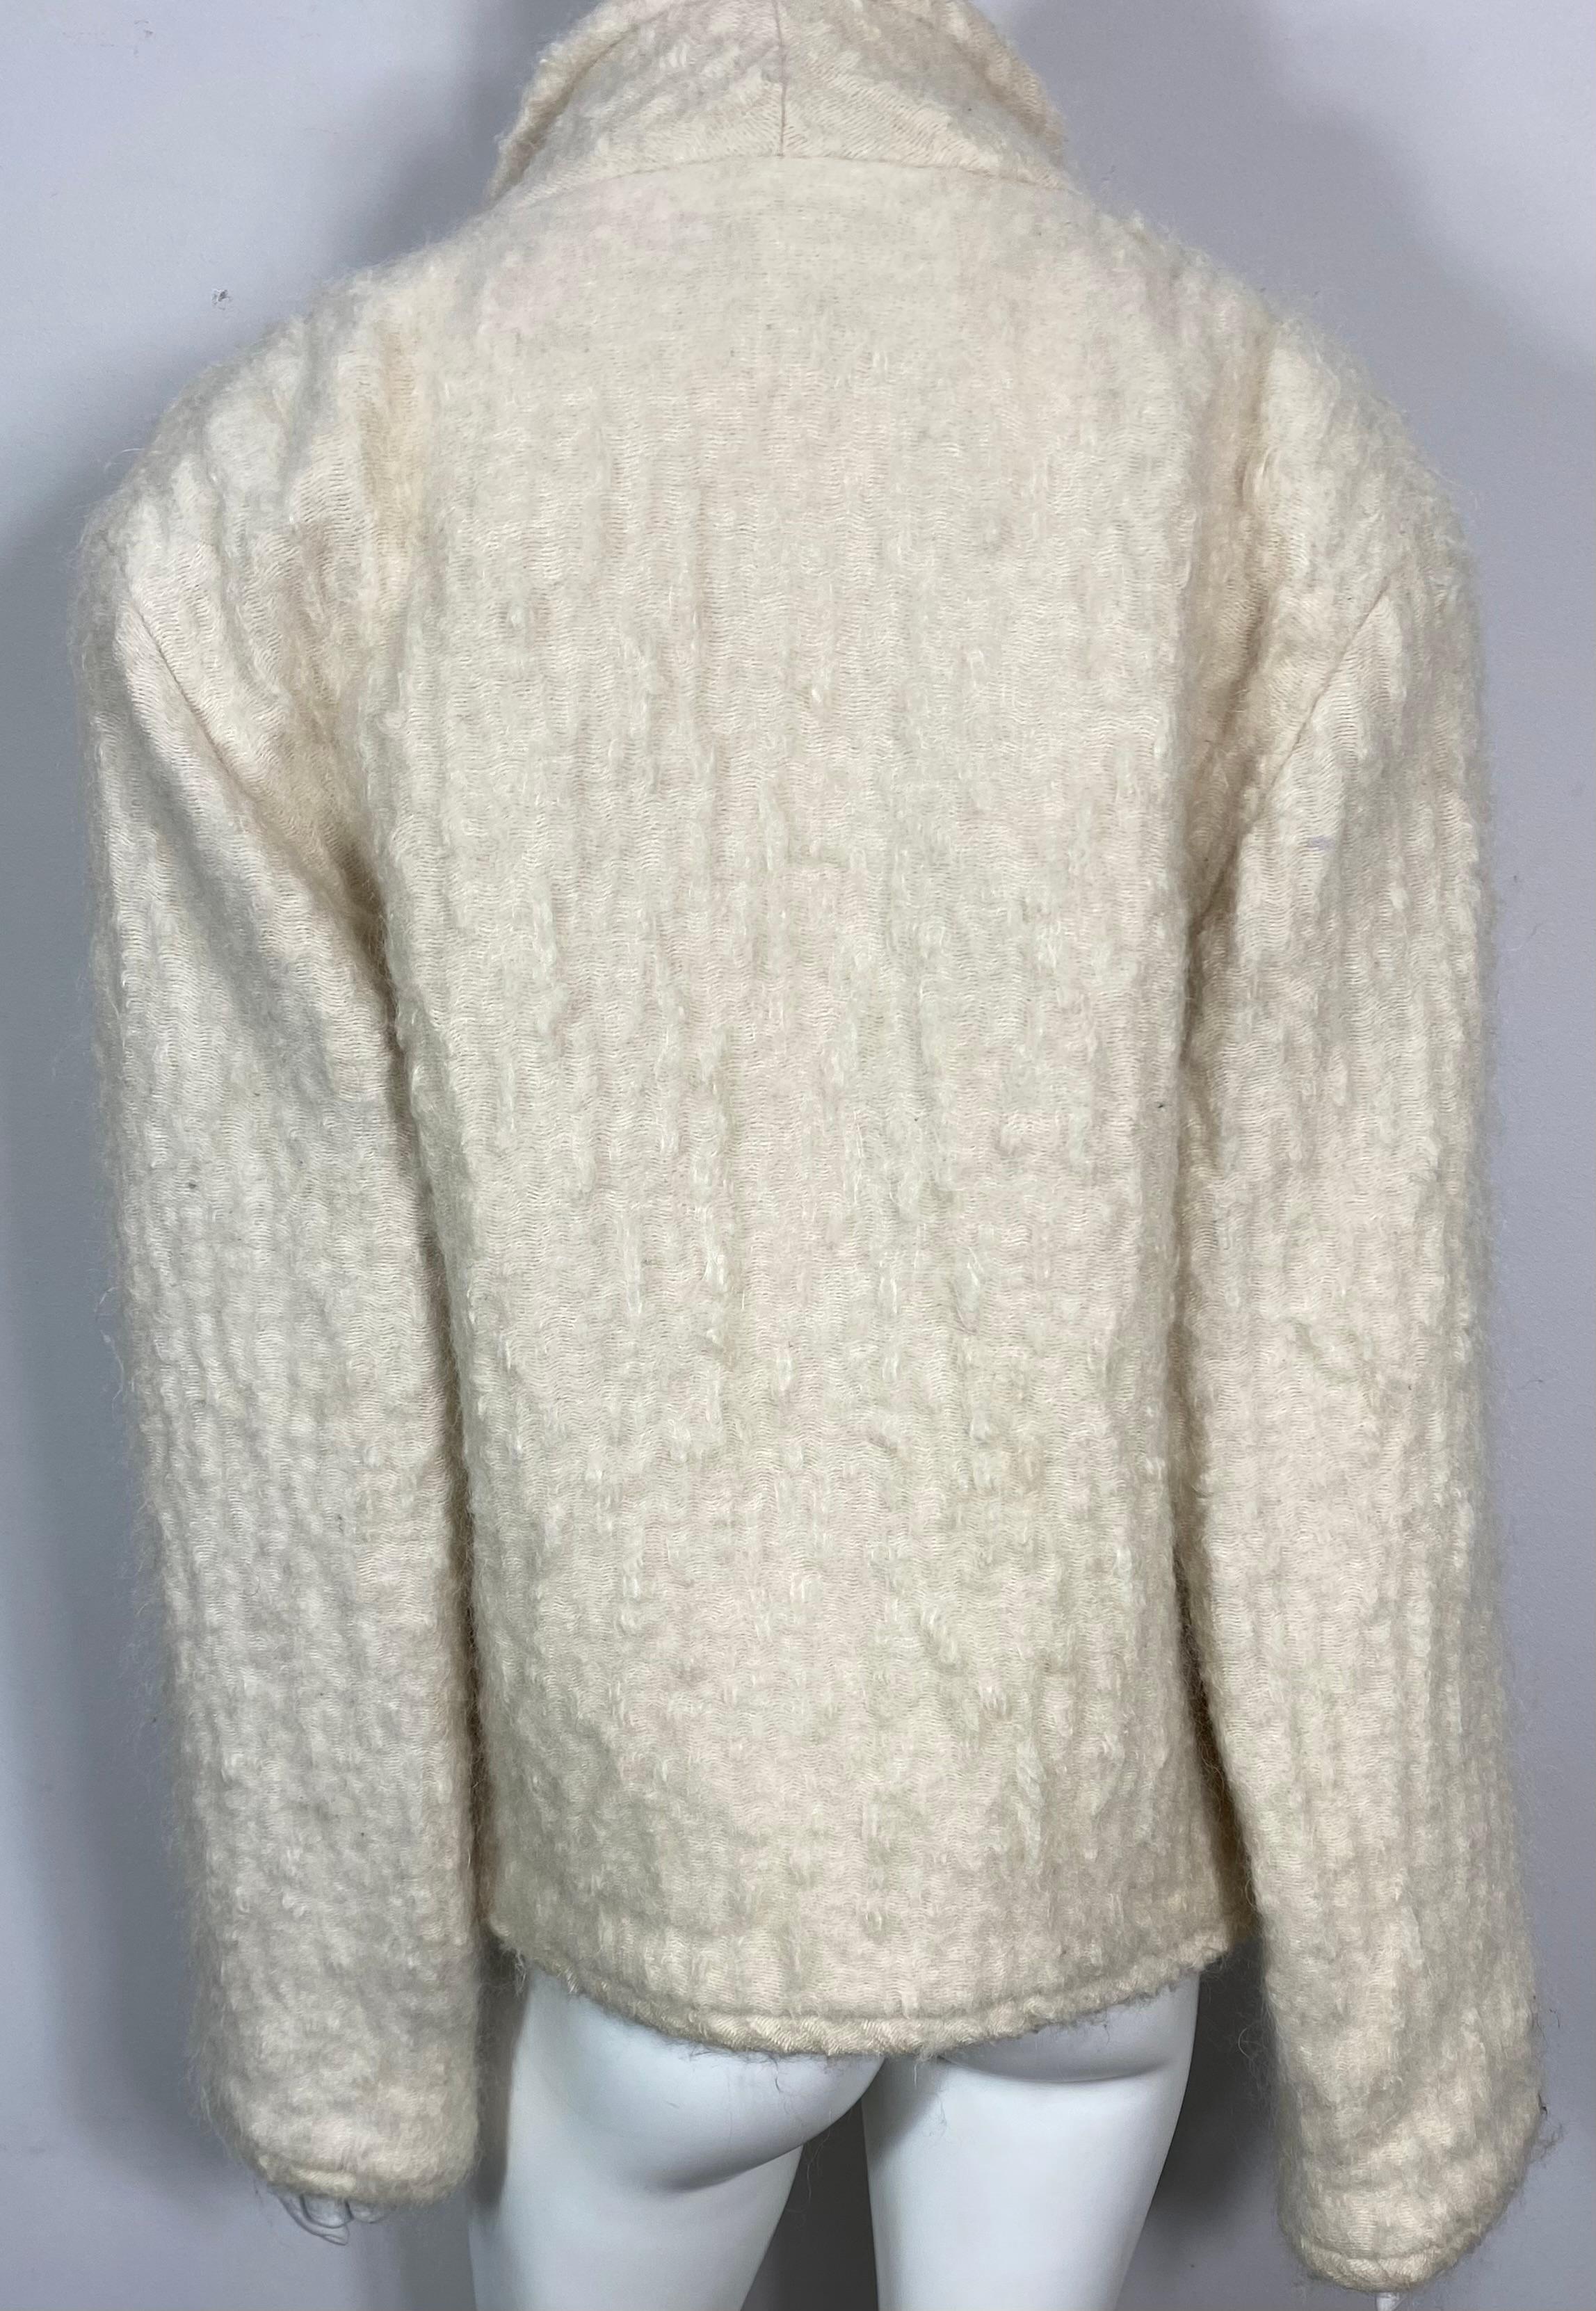 Chanel Runway Fall 1998 Creme Mohair & Wool Blend Jacket - Size 38 For Sale 1